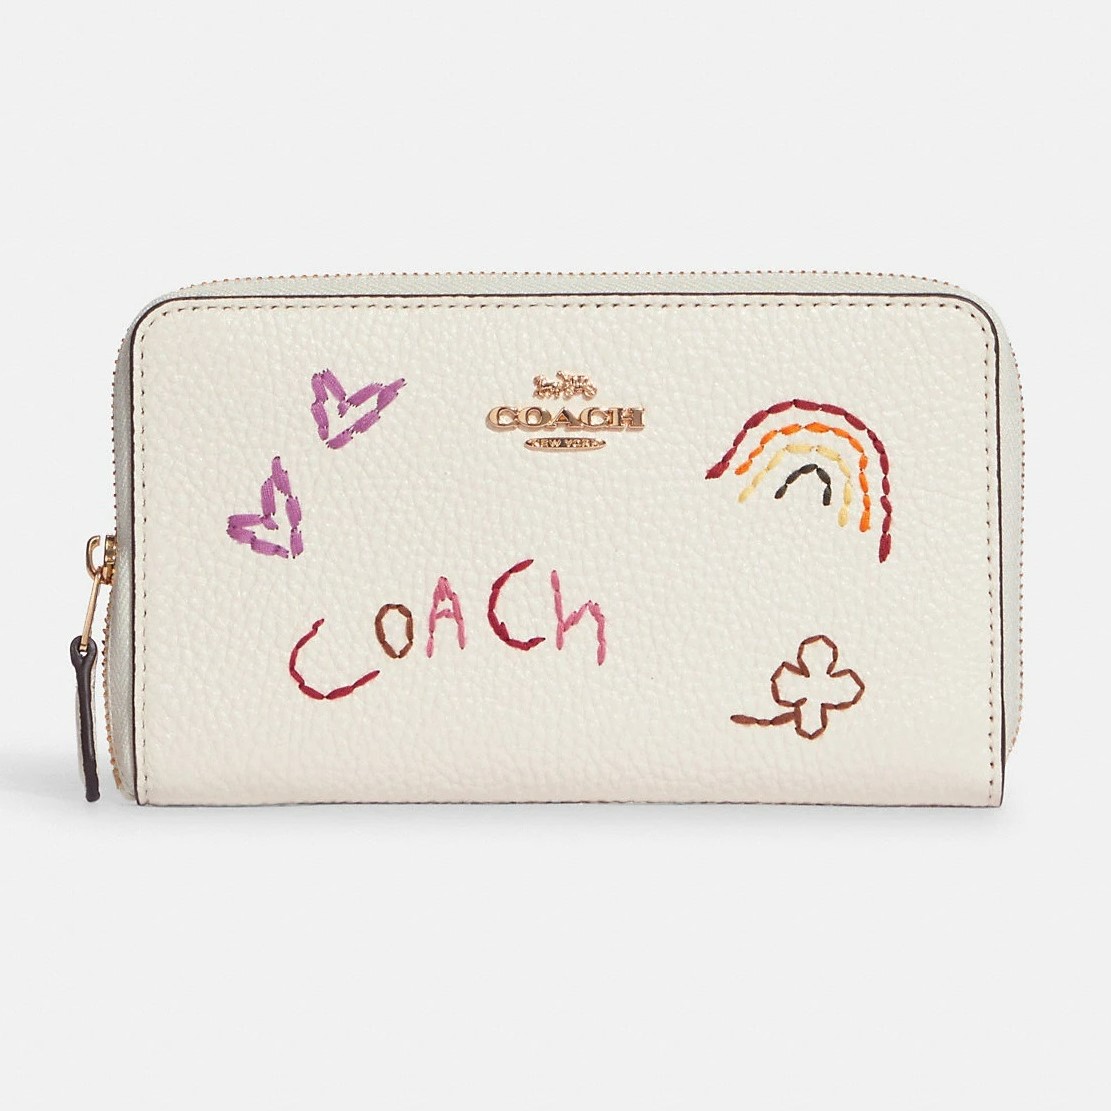 VÍ DÀI NỮ WHITE COACH MEDIUM ID ZIP WALLET WITH DIARY EMBROIDERY 3